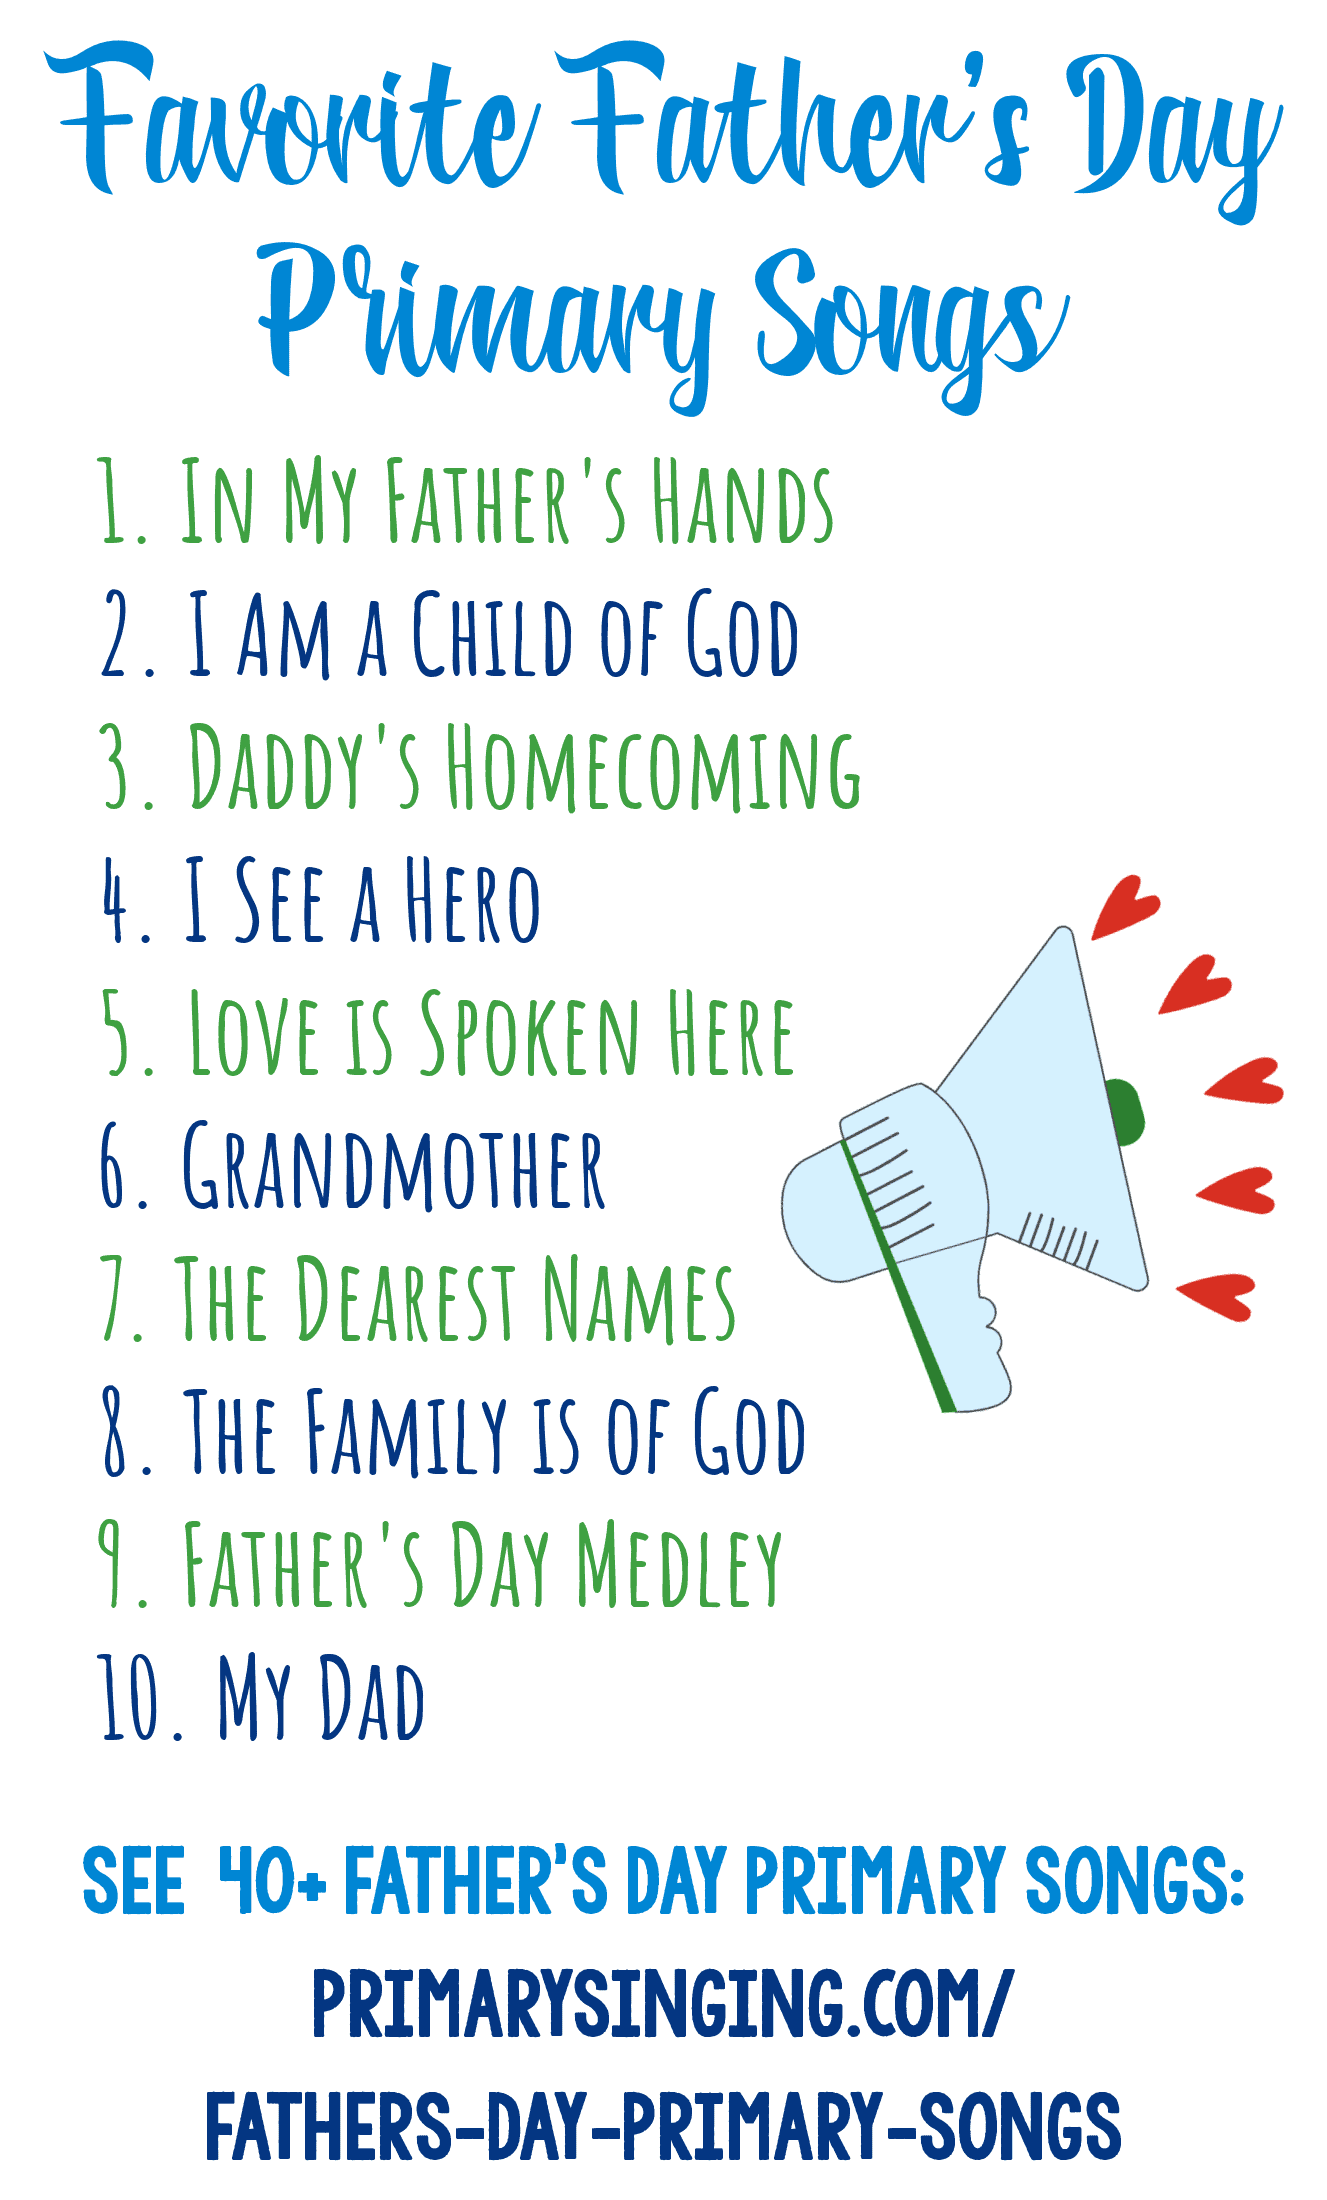 40 Favorite Father's Day Primary Songs with a massive list of LDS songs from the children's songbook, hymn book, and more!